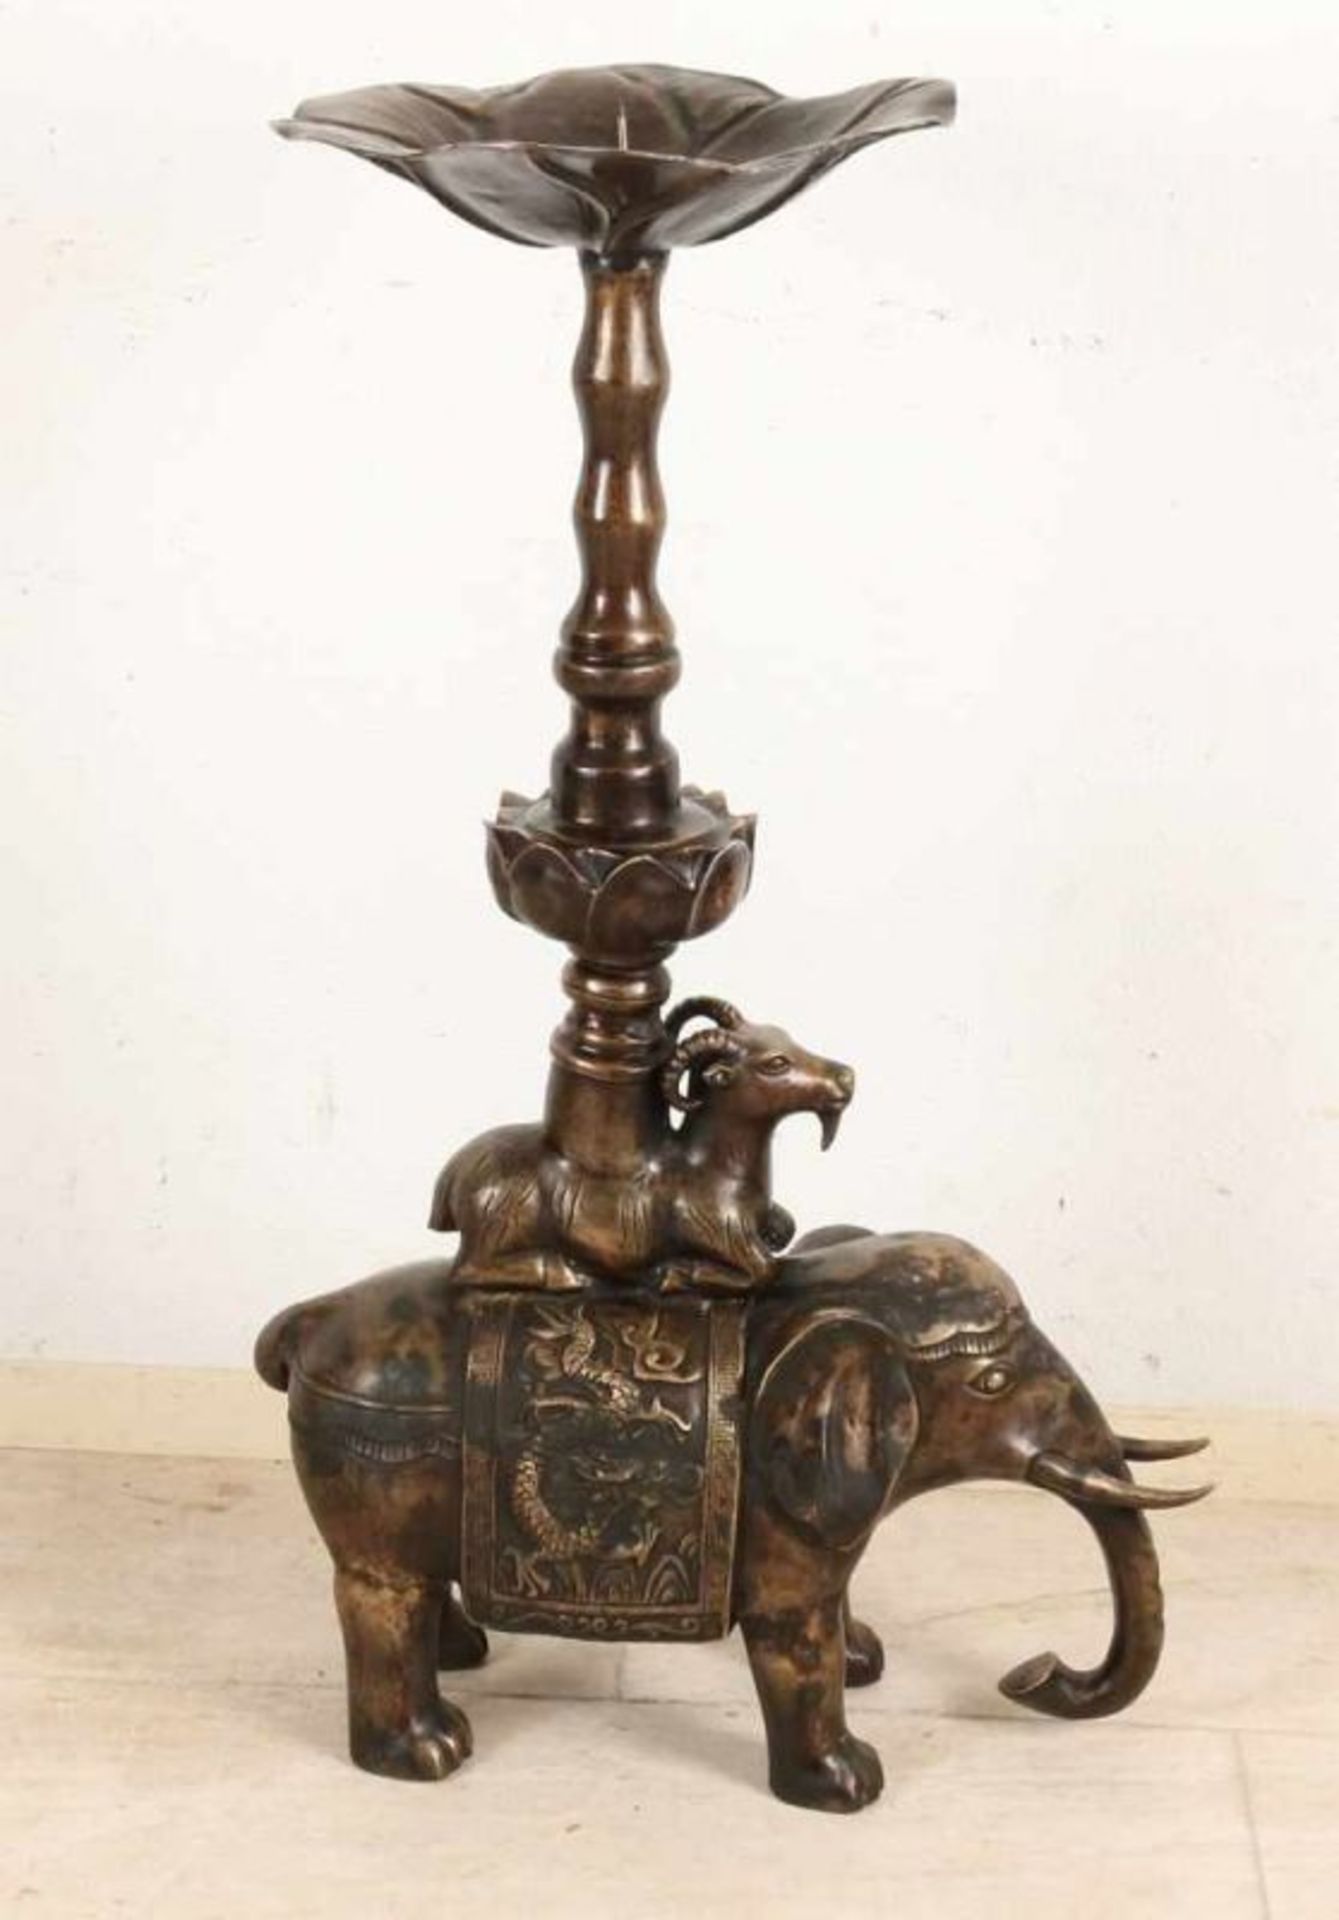 Large Chinese bronze candle candlestick with elephant and lotus flower. 21st century. Size: 90 x